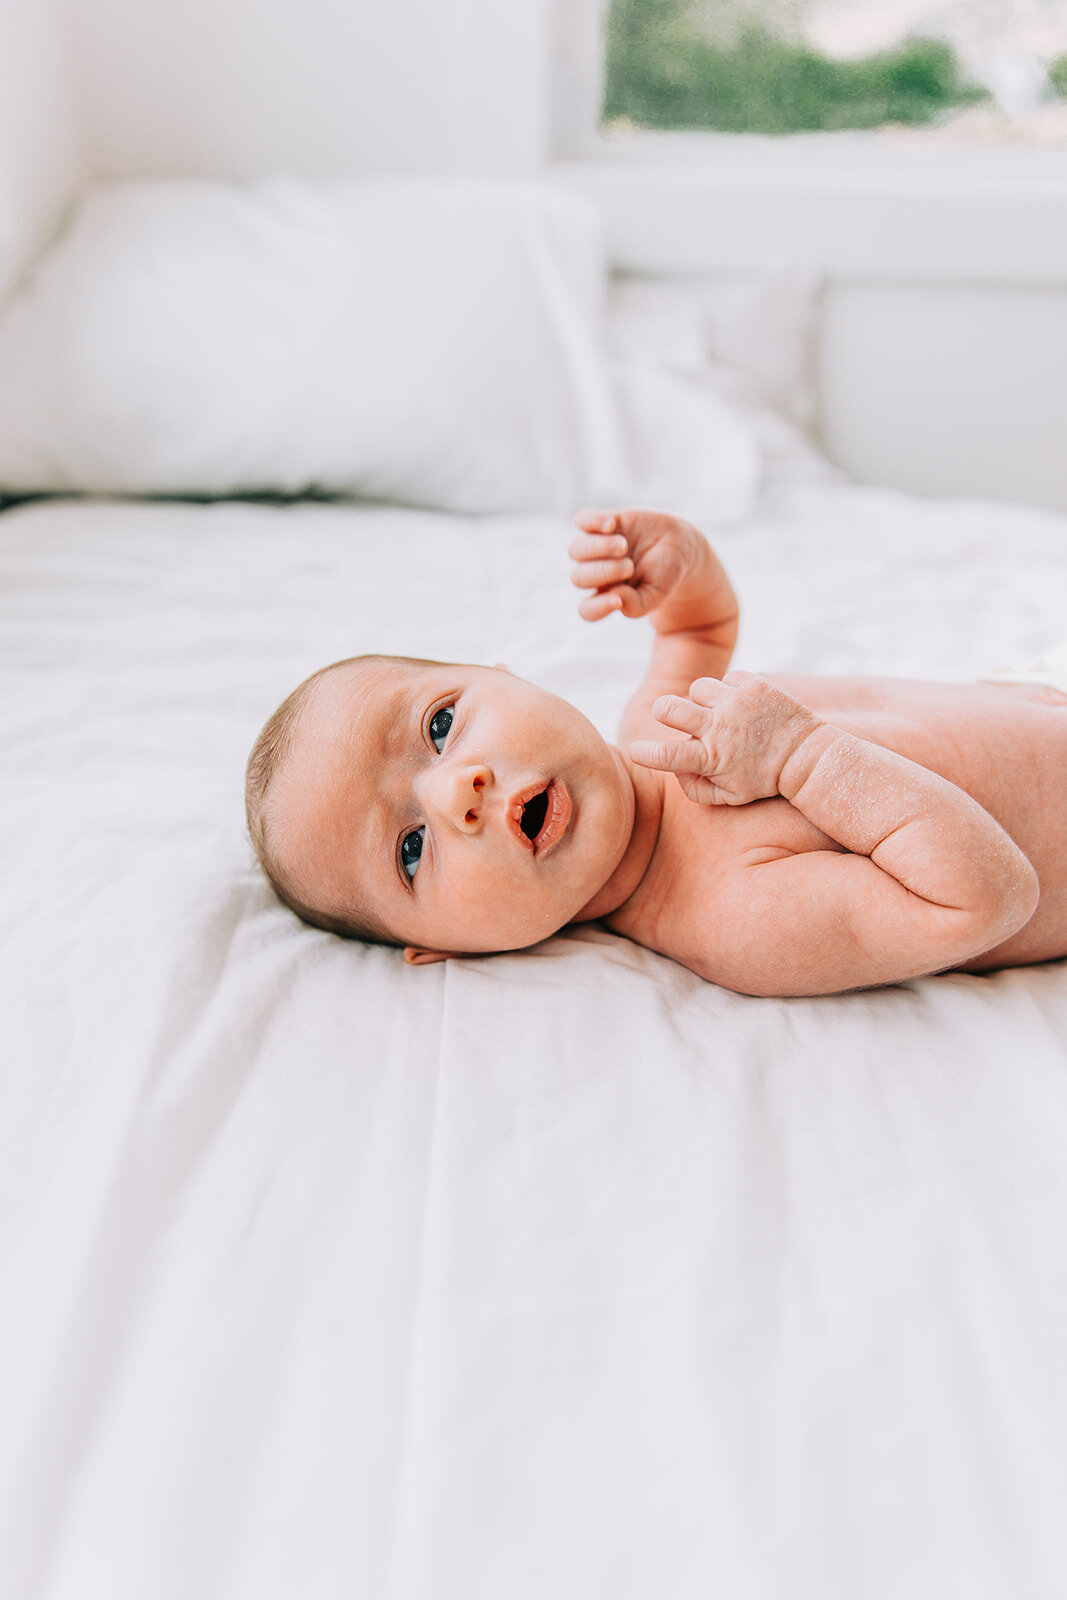  naked baby poses baby rolls chunky cheeks professional utah photographers professional family photographers in cache valley logan utah newborn photography mattress pose inspiration arm rolls adorable baby pictures casual photoshoot inspiration bella